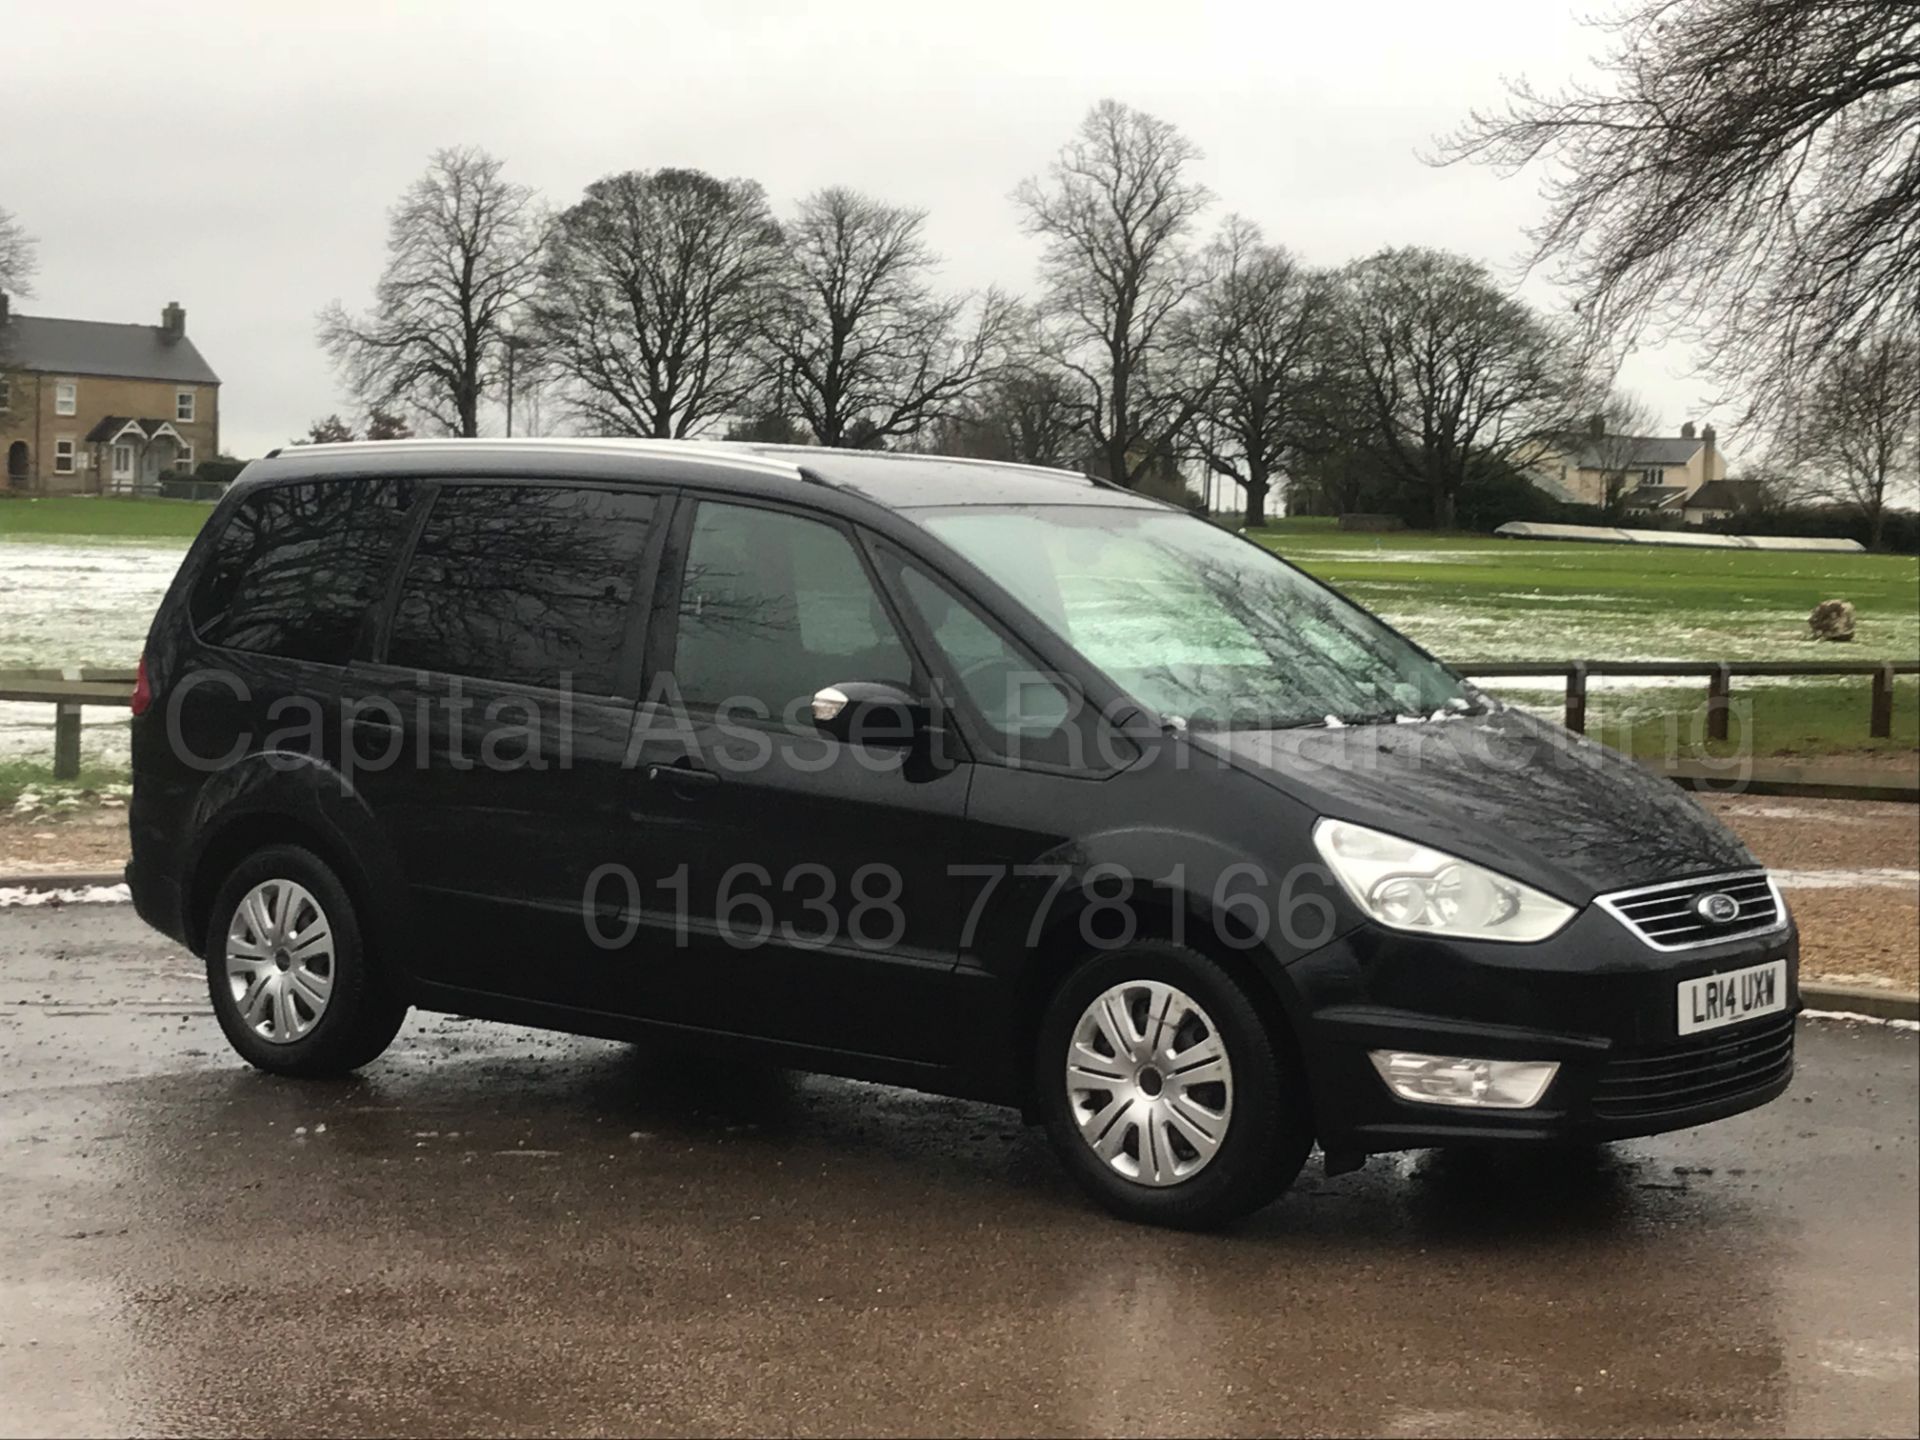 (On Sale) FORD GALAXY 'ZETEC' 7 SEATER (2014 - 14 REG) 2.0 TDCI - 140 BHP - POWER SHIFT (1 OWNER)